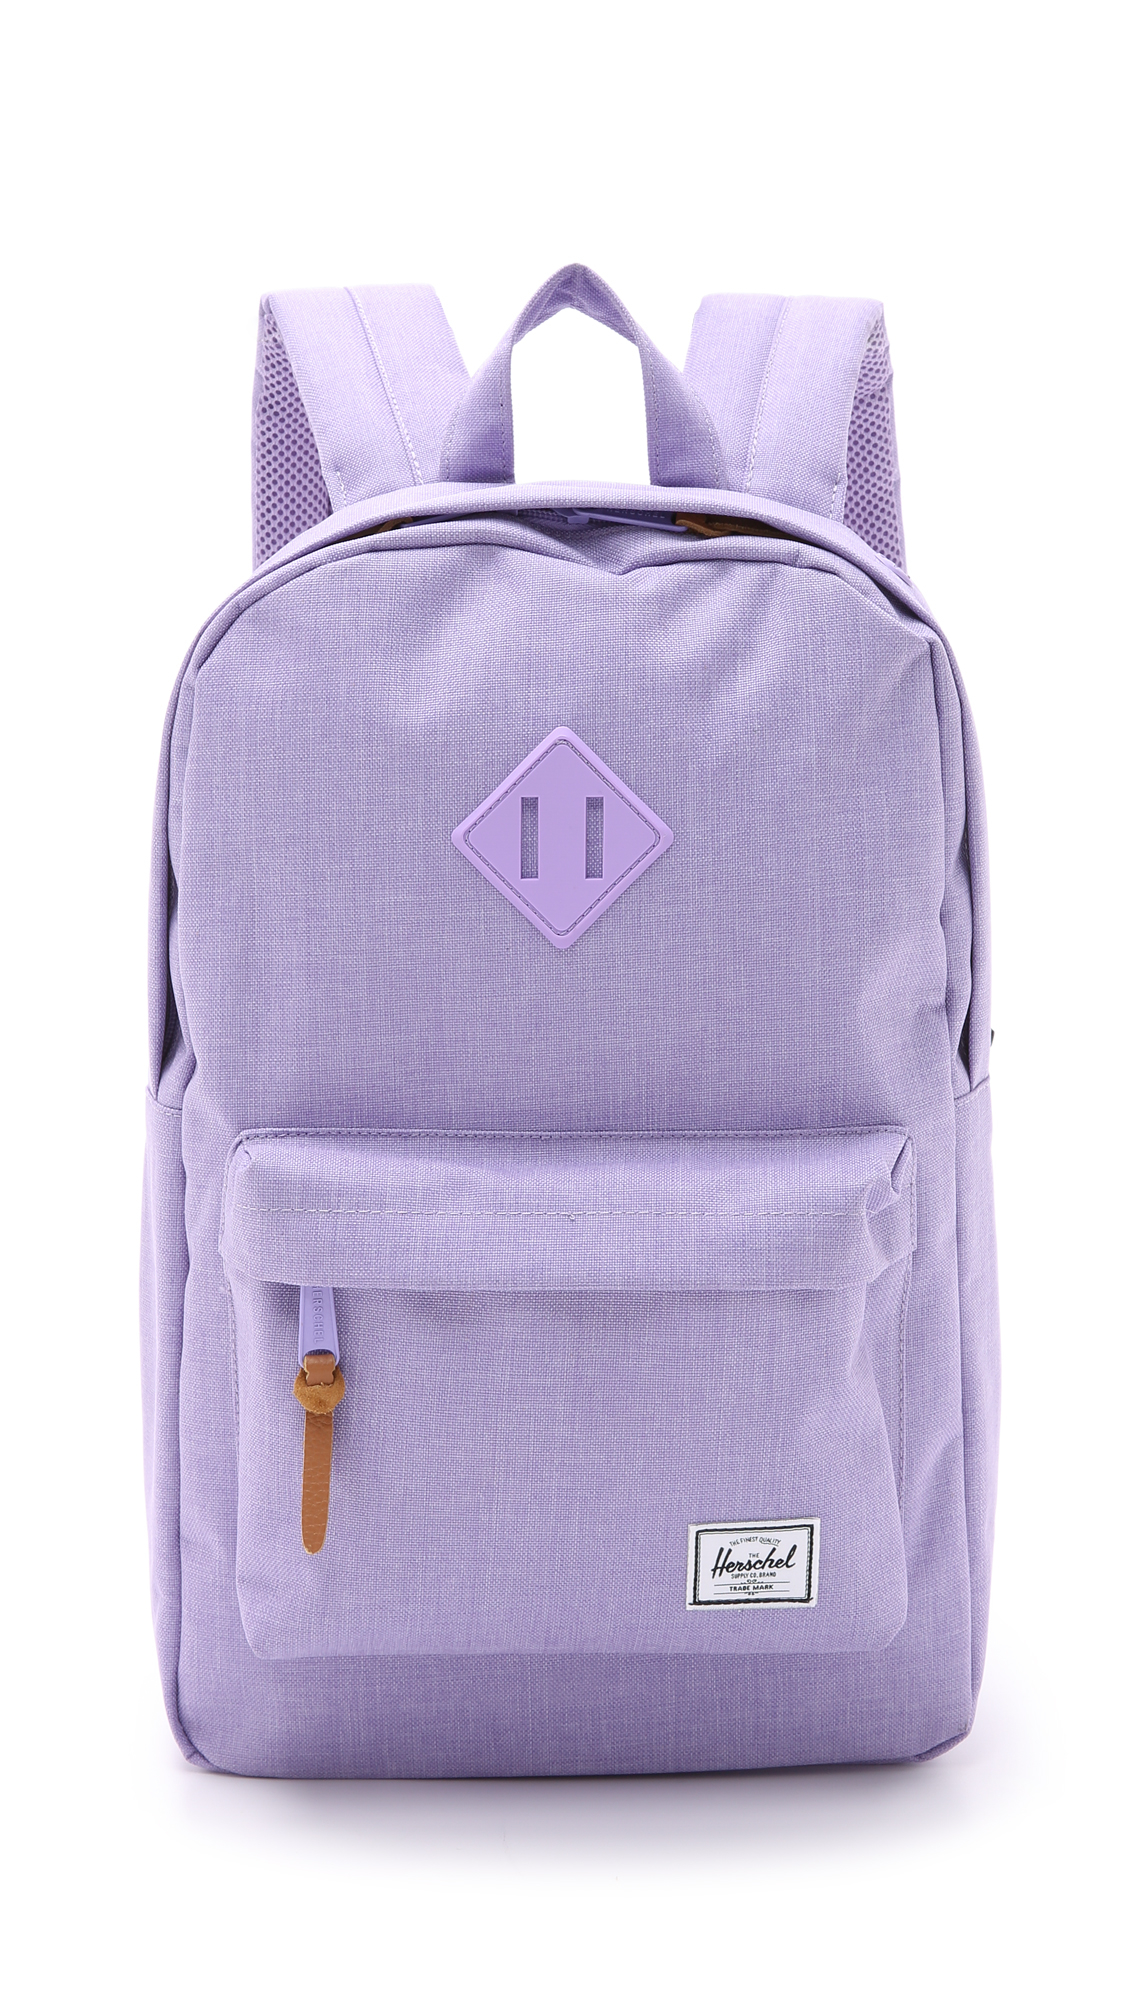 Herschel Supply Co. Heritage Mid Size Backpack - Electric Lilac in Purple |  Lyst